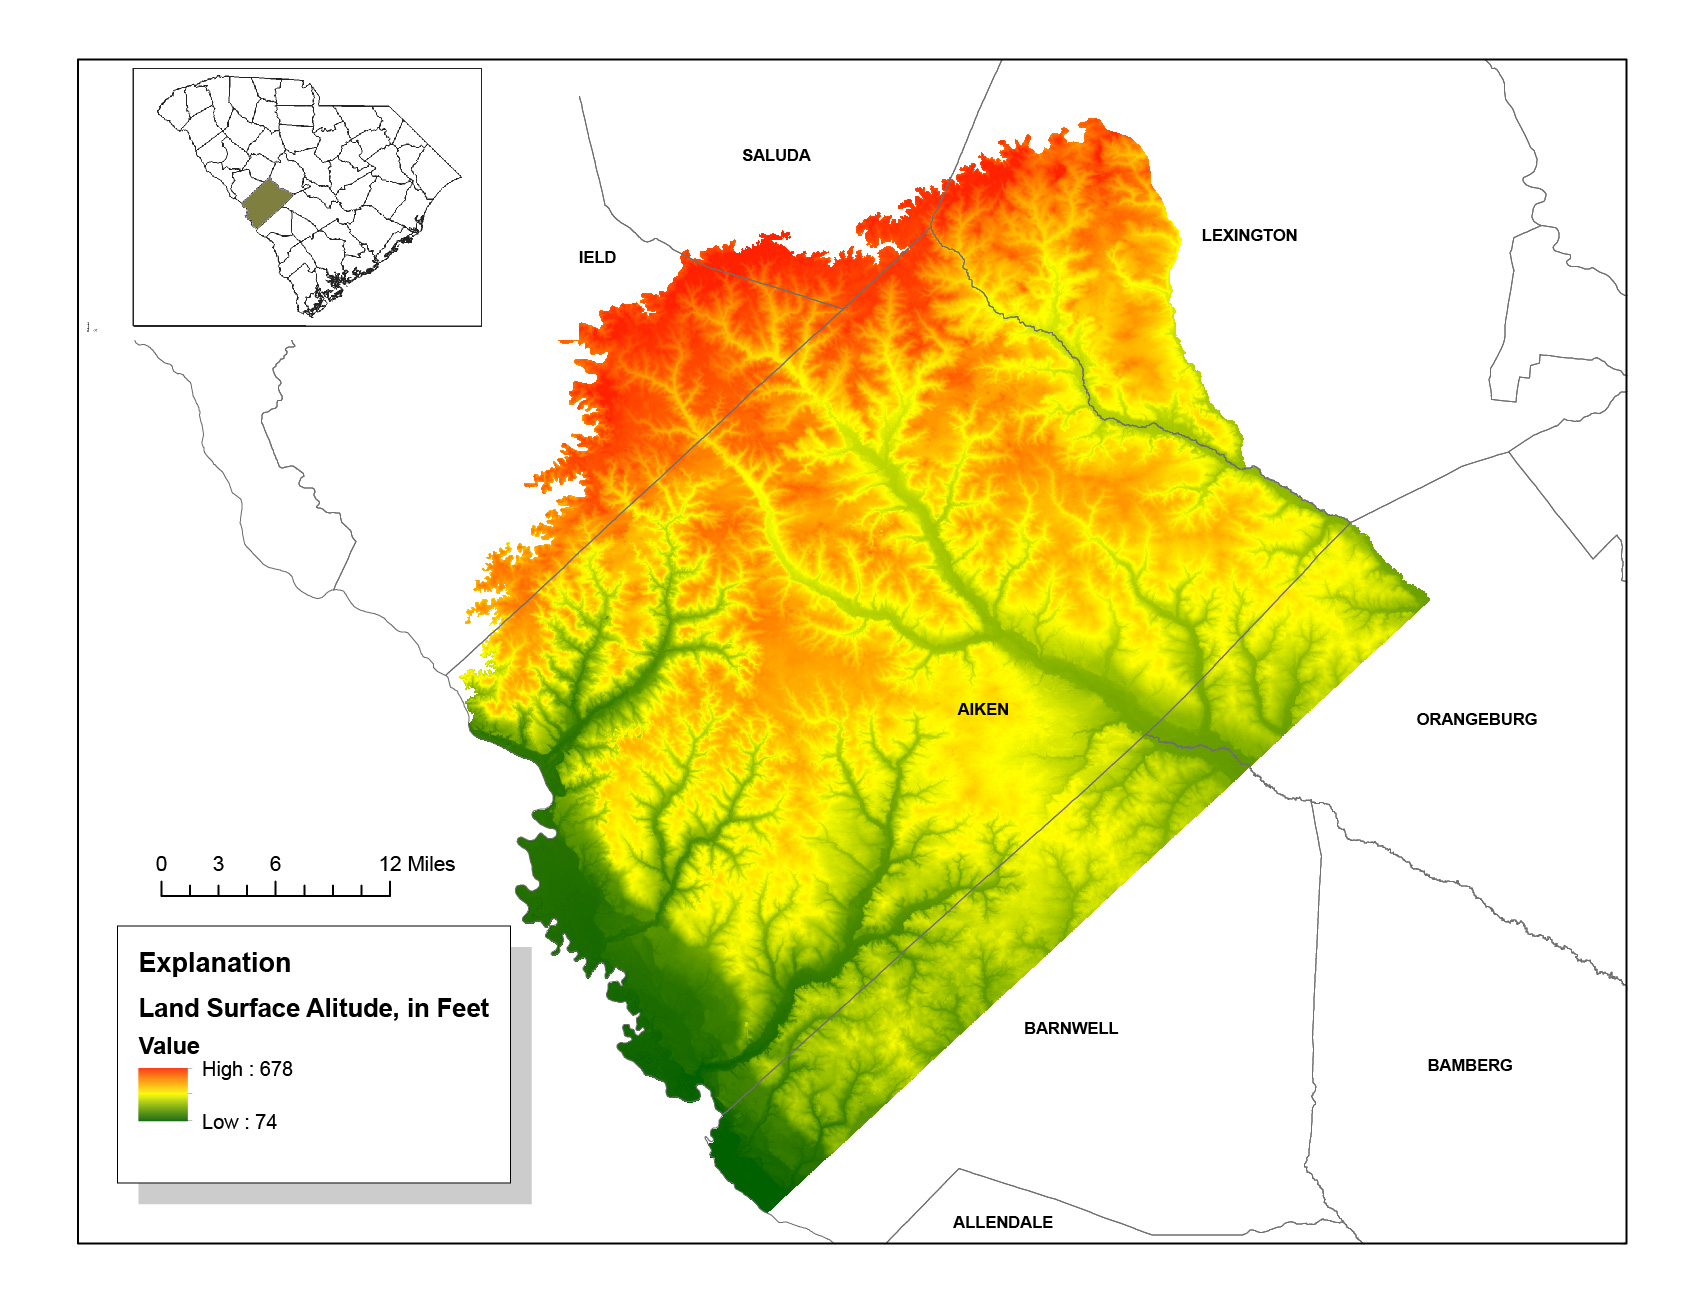 Land surface altitudes of the Aiken County, South Carolina, area derived from lidar.